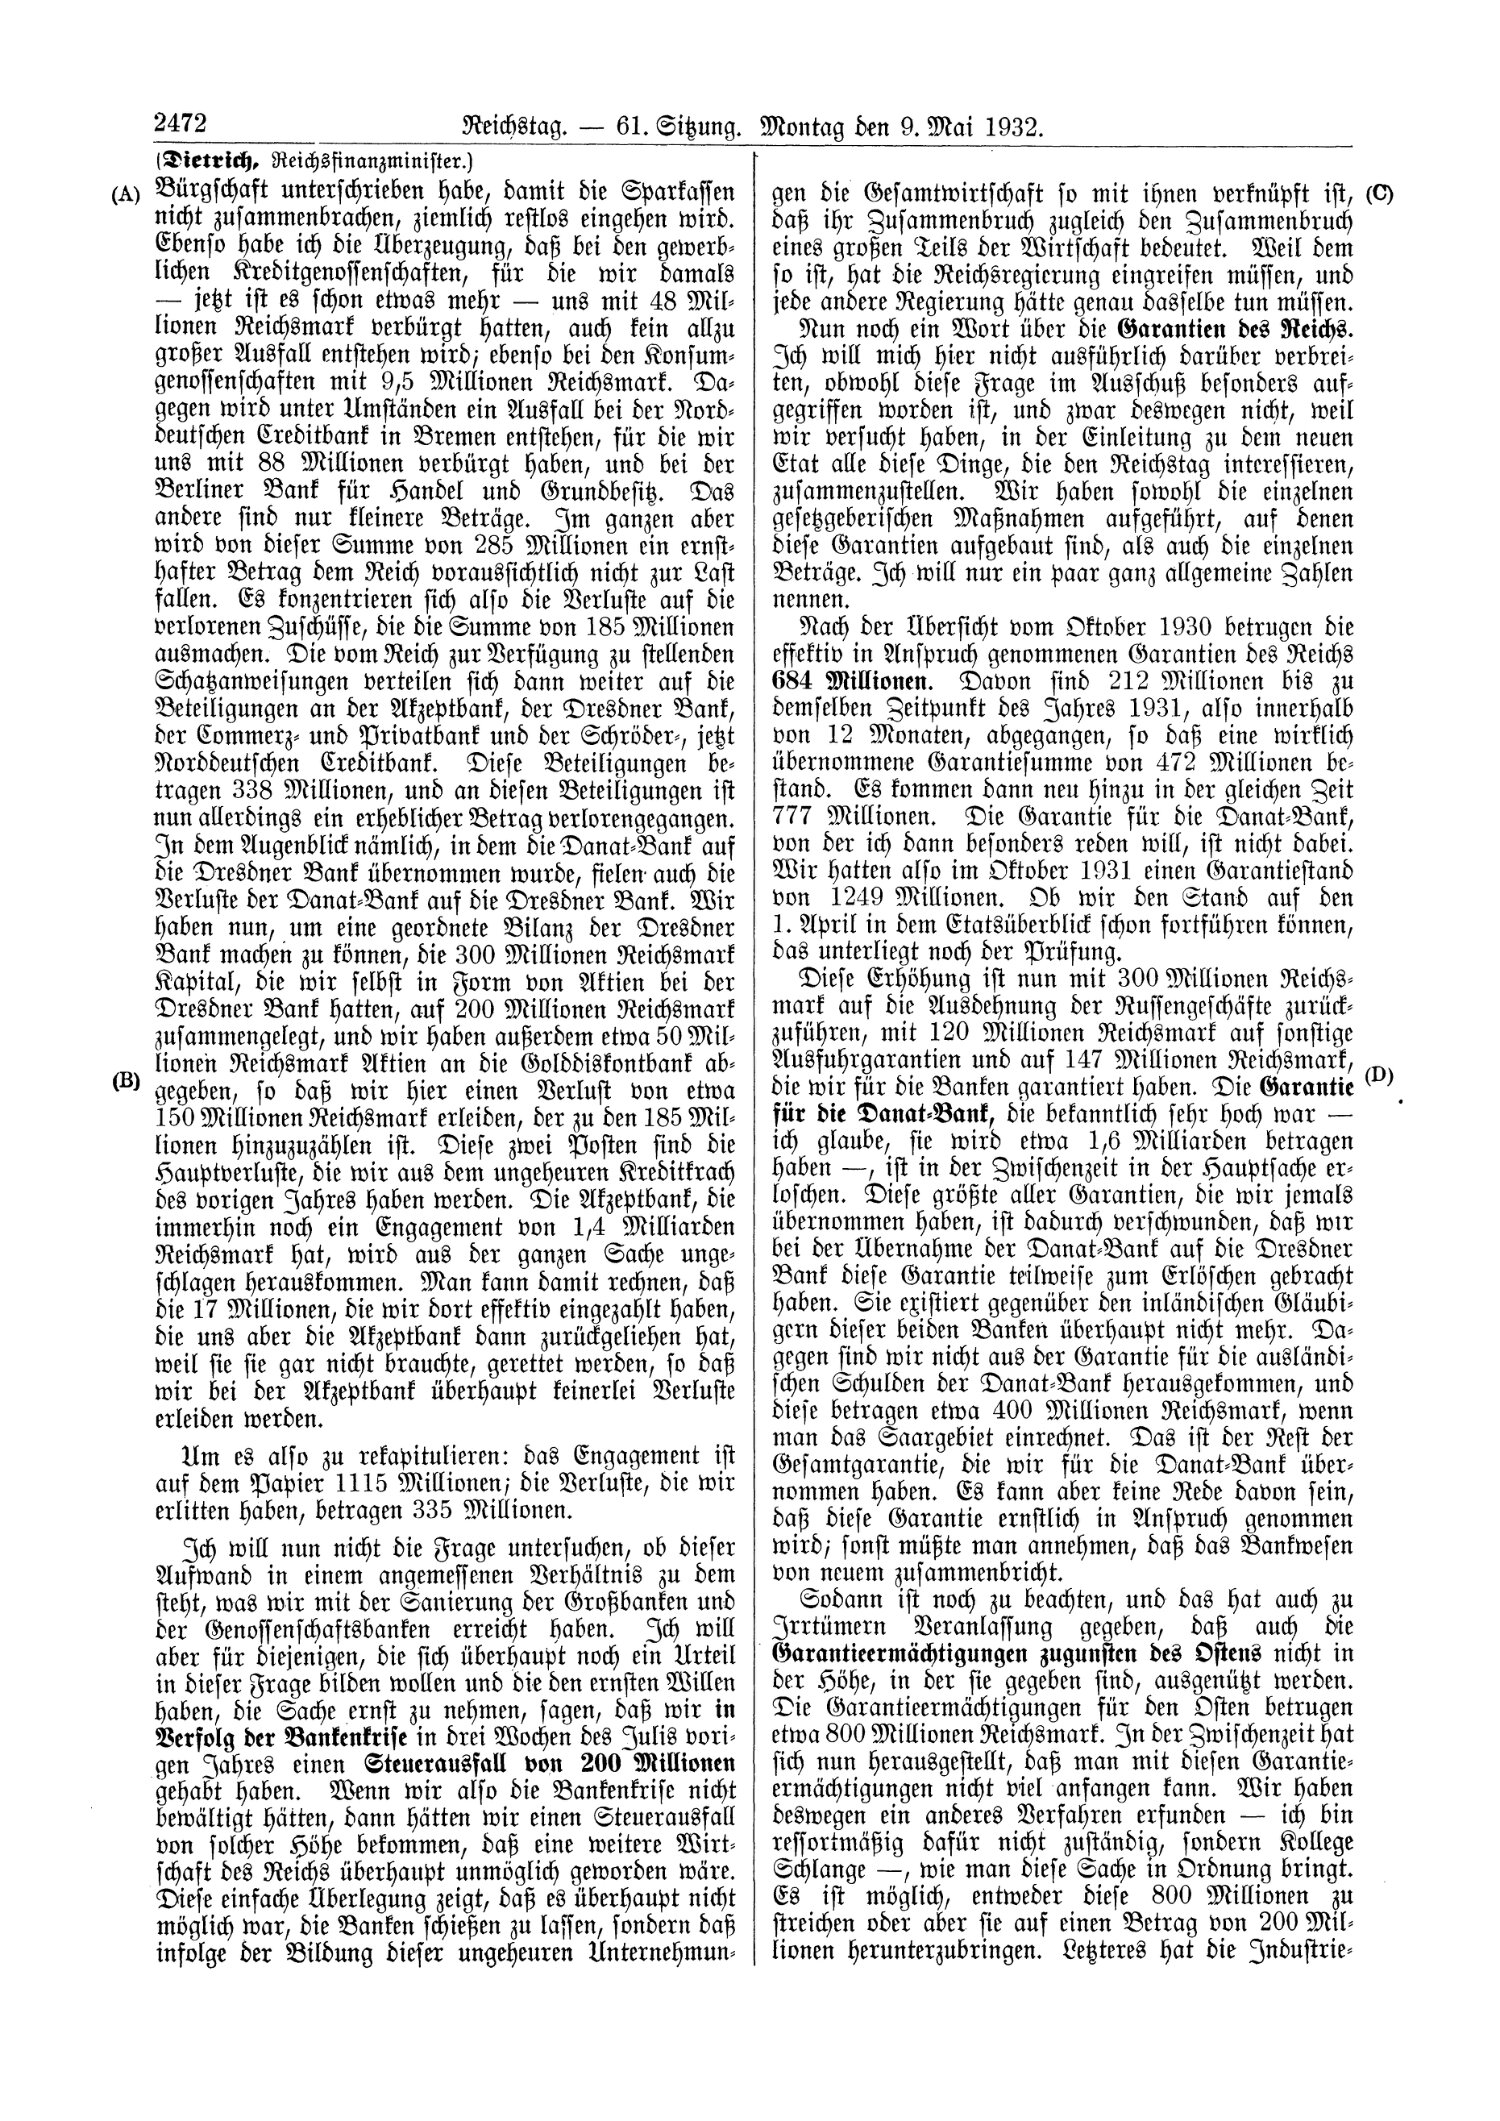 Scan of page 2472